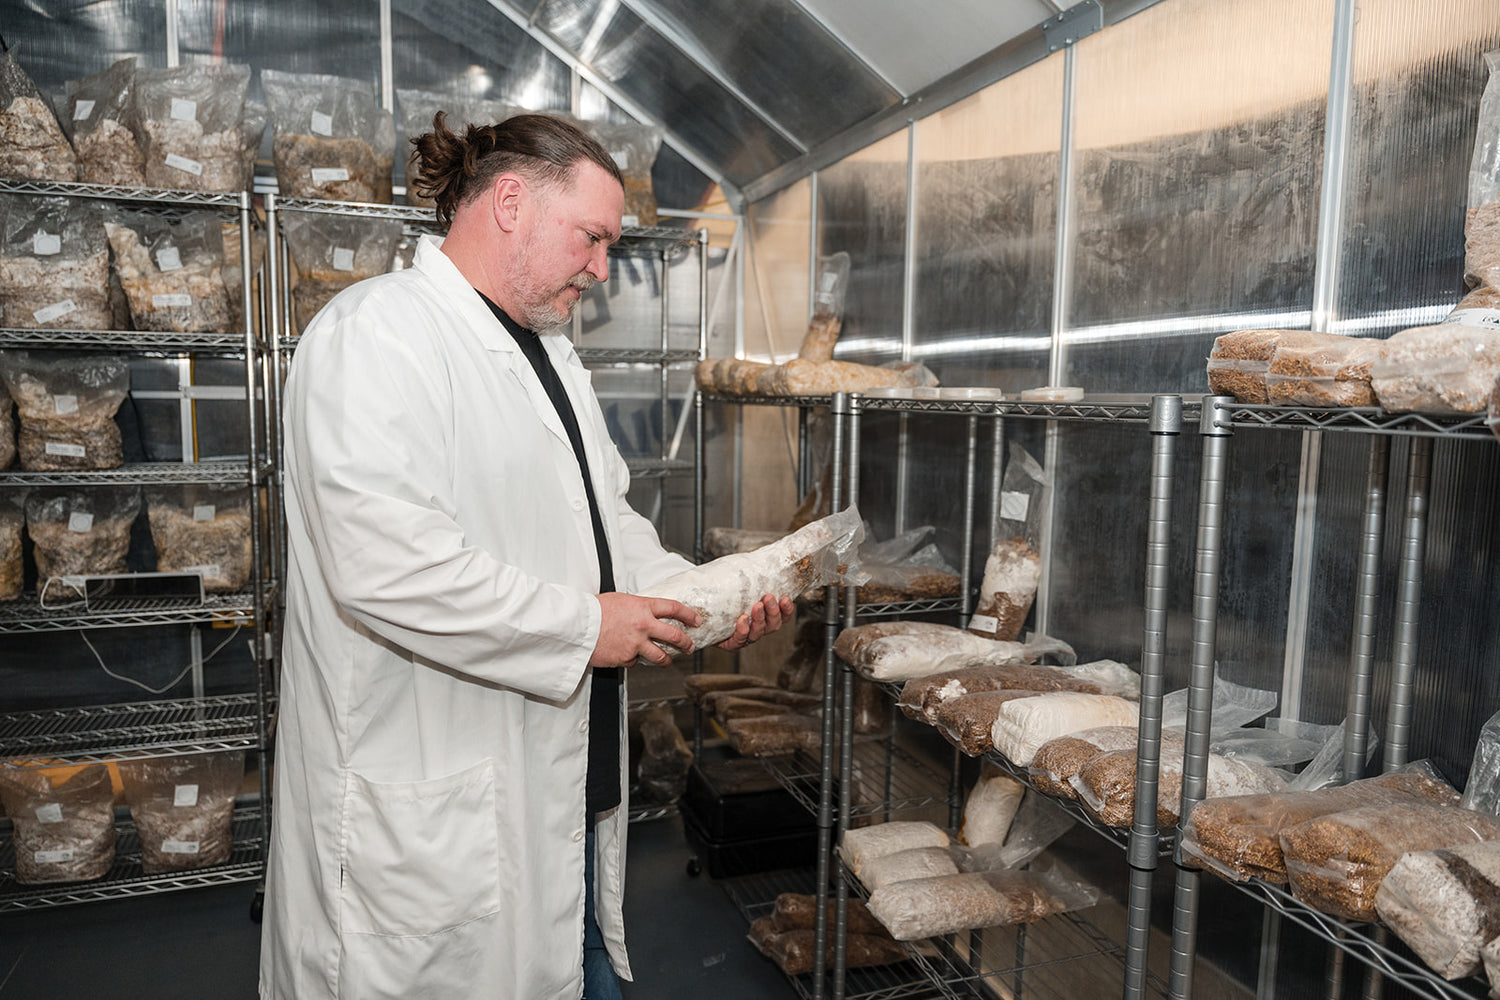 Warren looking at a bag of growing mushrooms in a grow tent